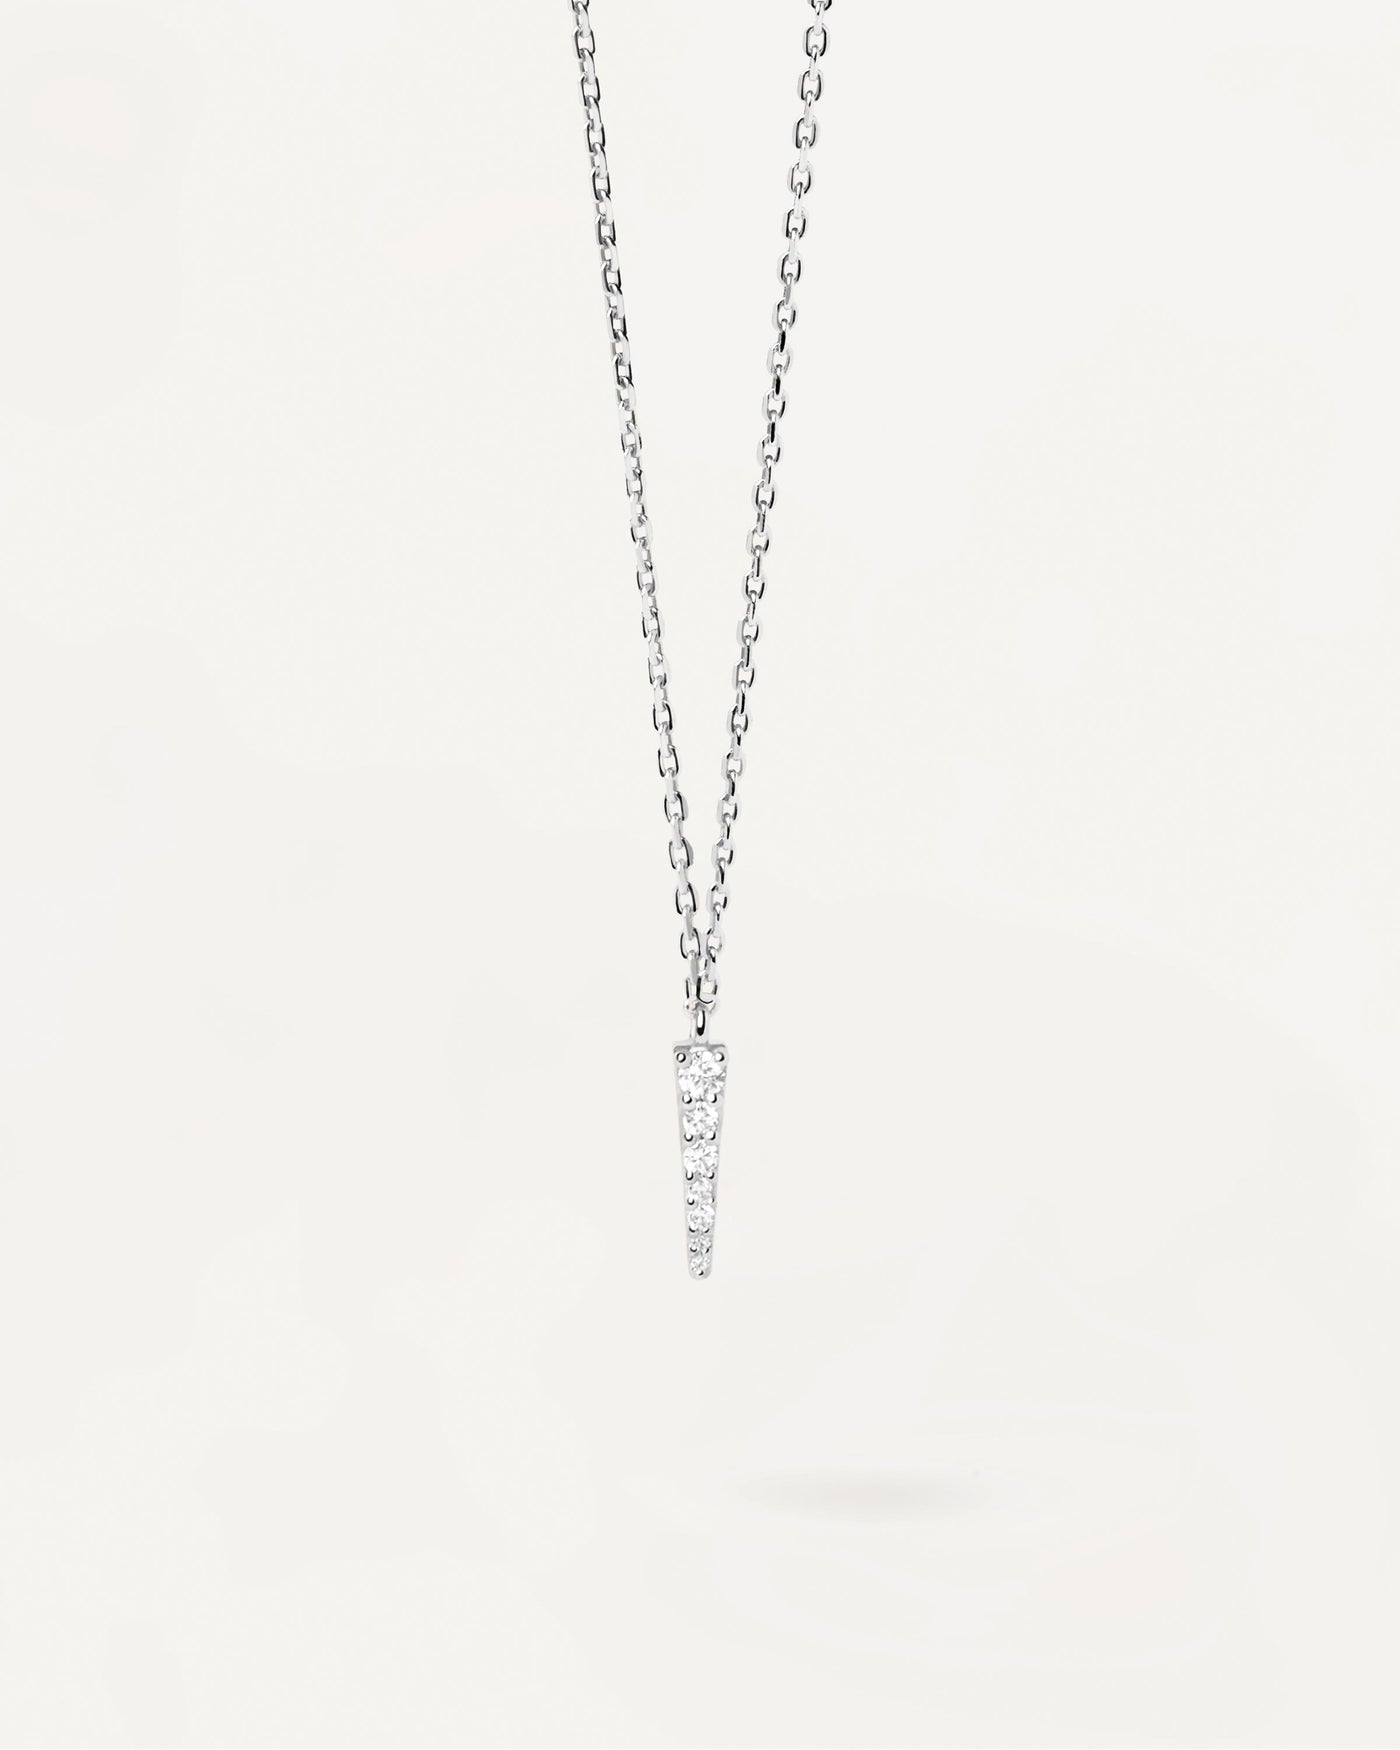 2023 Selection | Peak Silver Necklace. Sterling silver necklace with white zirconia pendant in tip shape. Get the latest arrival from PDPAOLA. Place your order safely and get this Best Seller. Free Shipping.